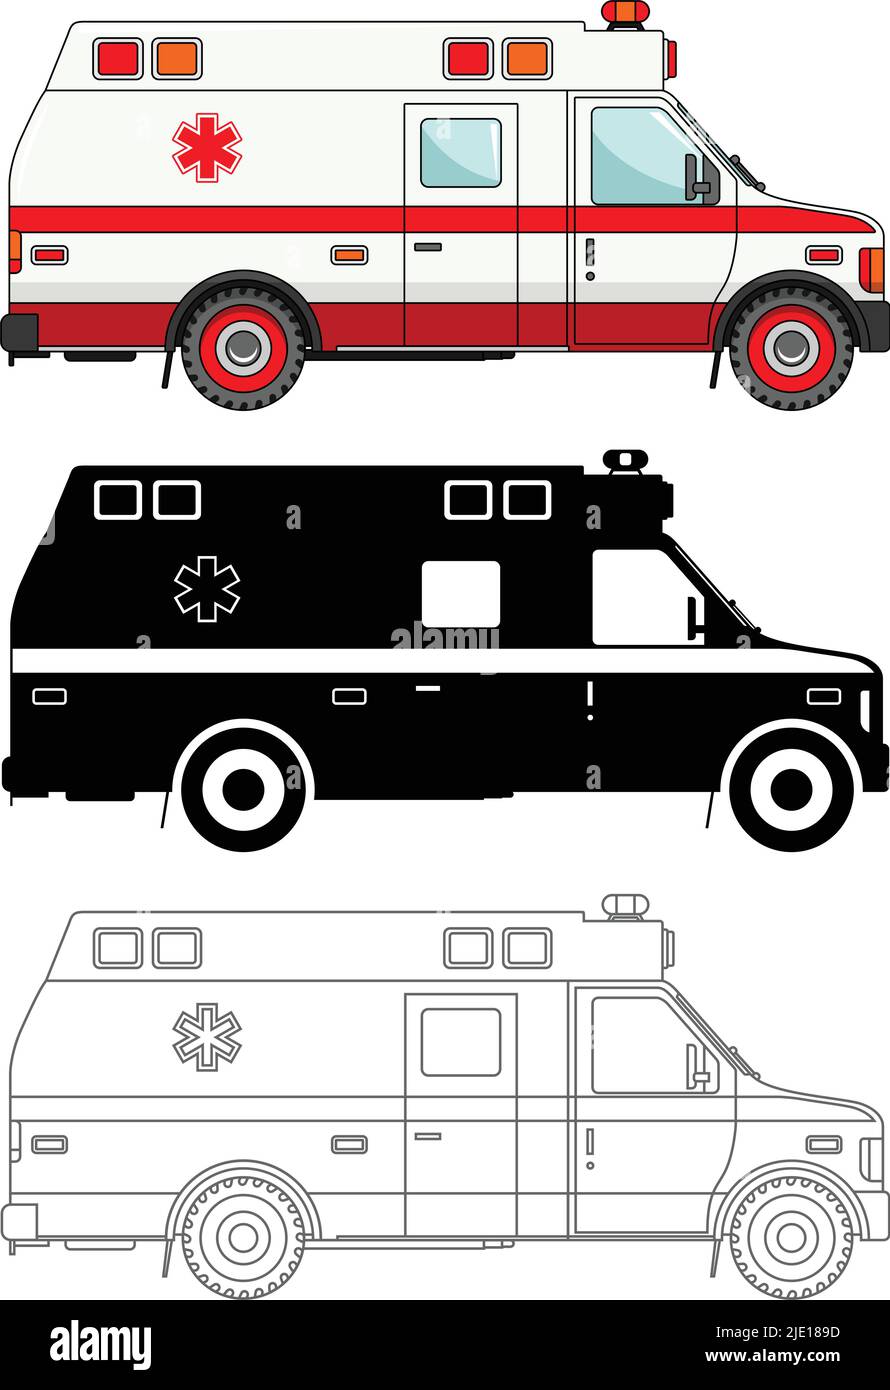 Detailed illustration of ambulance cars isolated on white background in flat style. Stock Vector